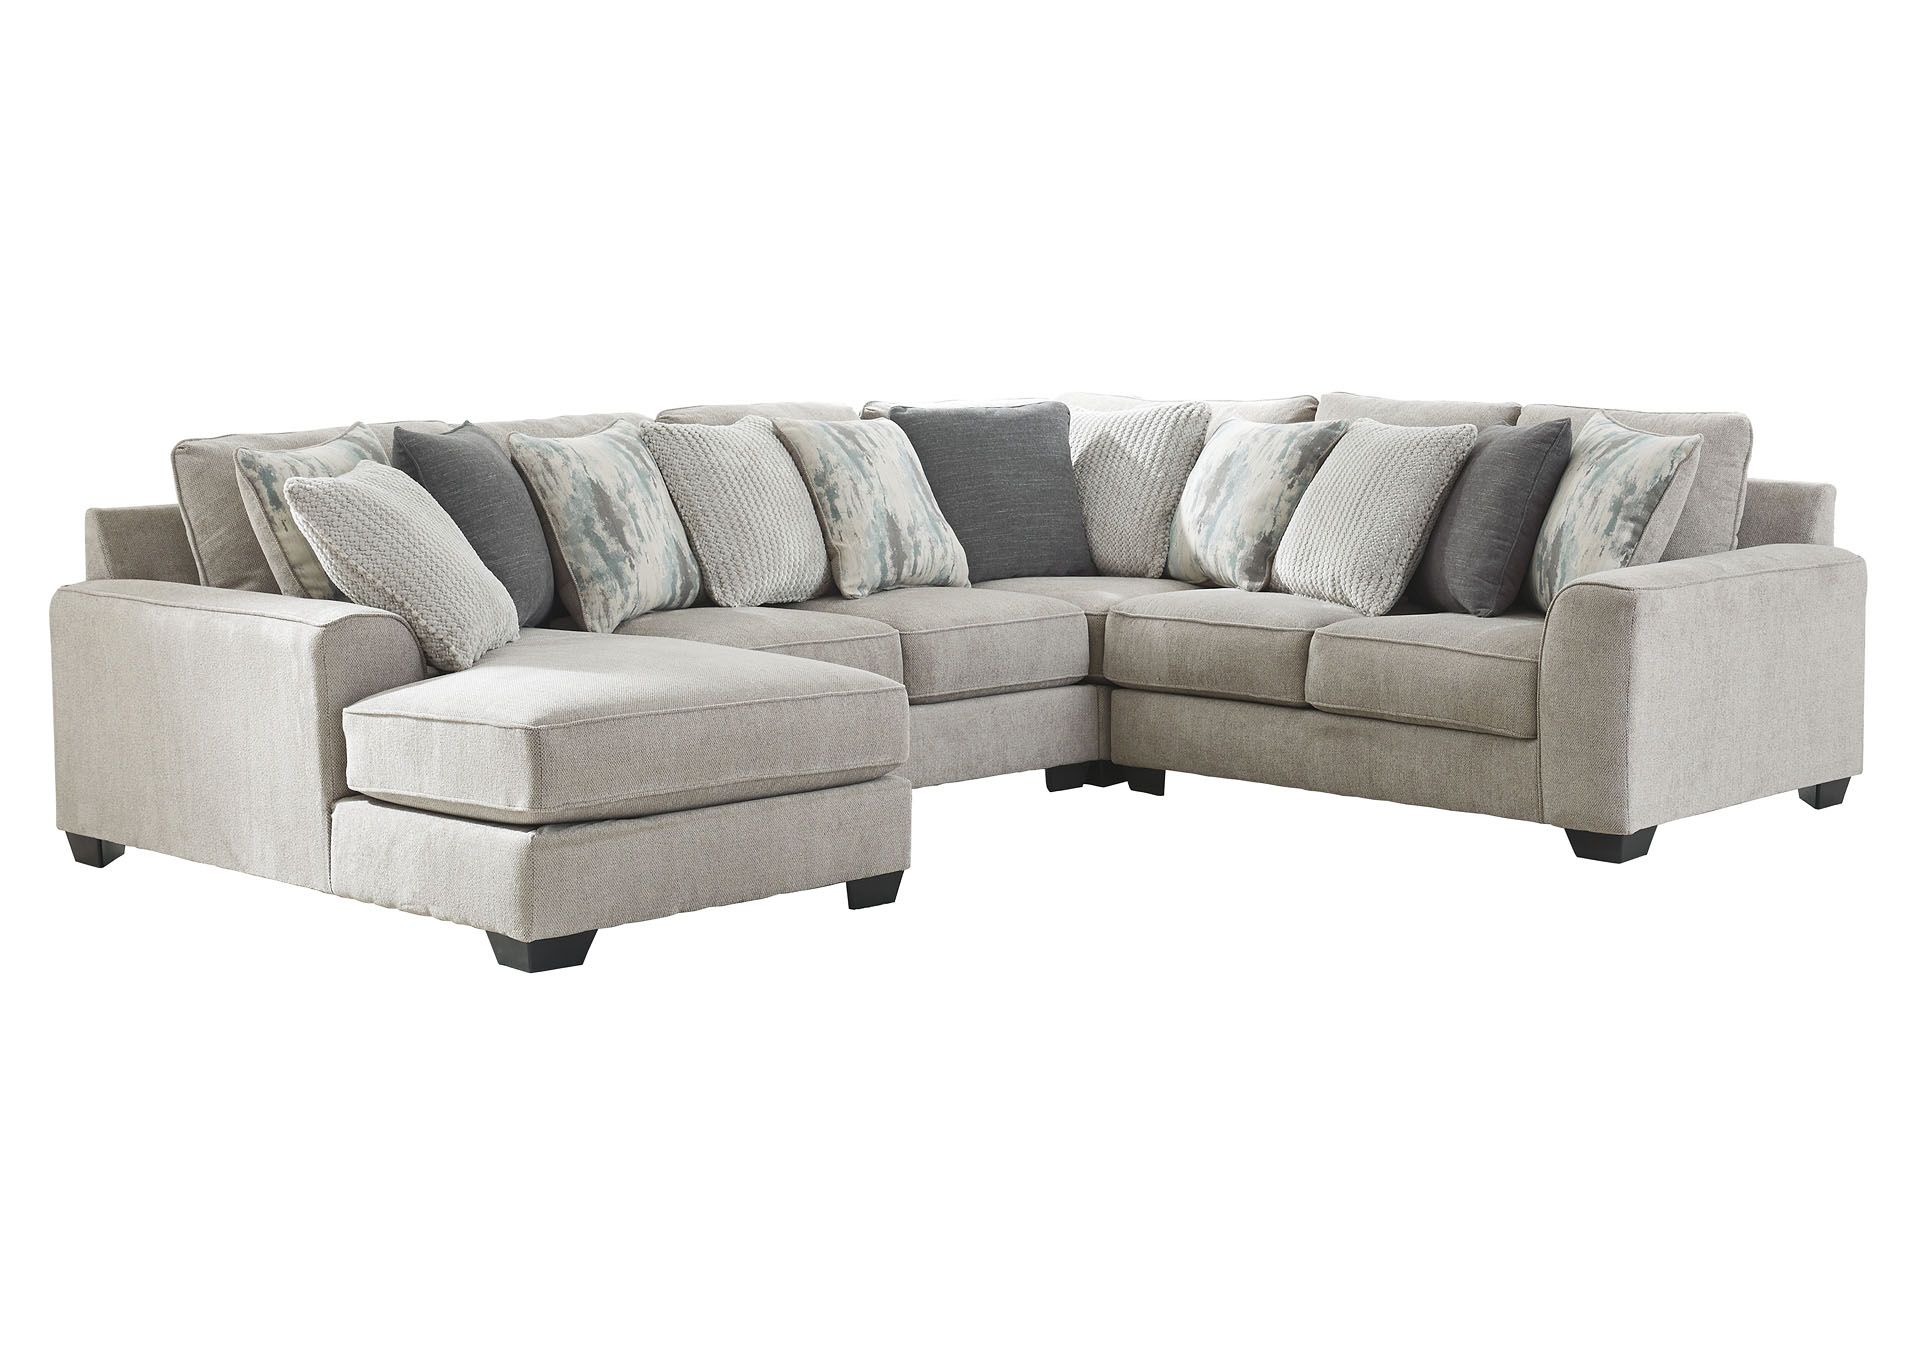 Ardsley 4 Piece Sectional With Chaise Ashley Furniture Homestore In Left Or Right Facing Sleeper Sectionals (Gallery 1 of 21)